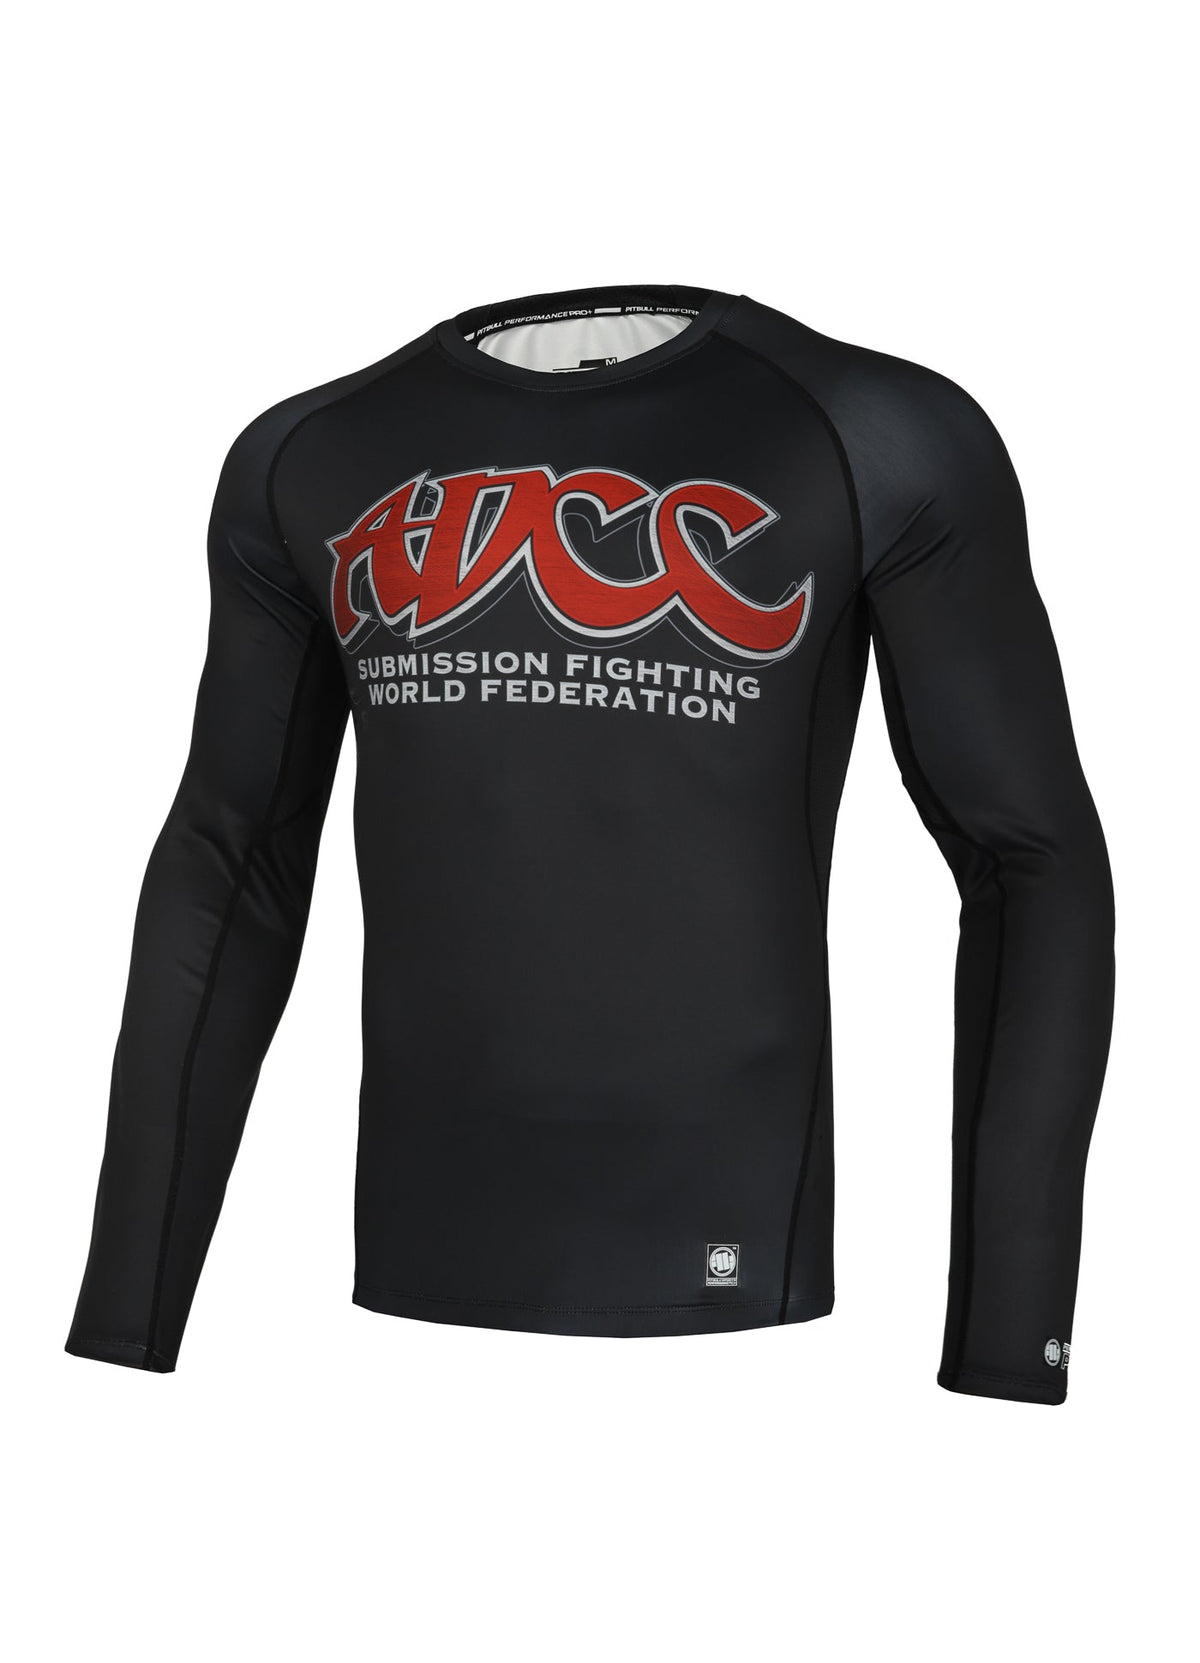 ADCC Fitted Black/Red Long Sleeve Rash Guard